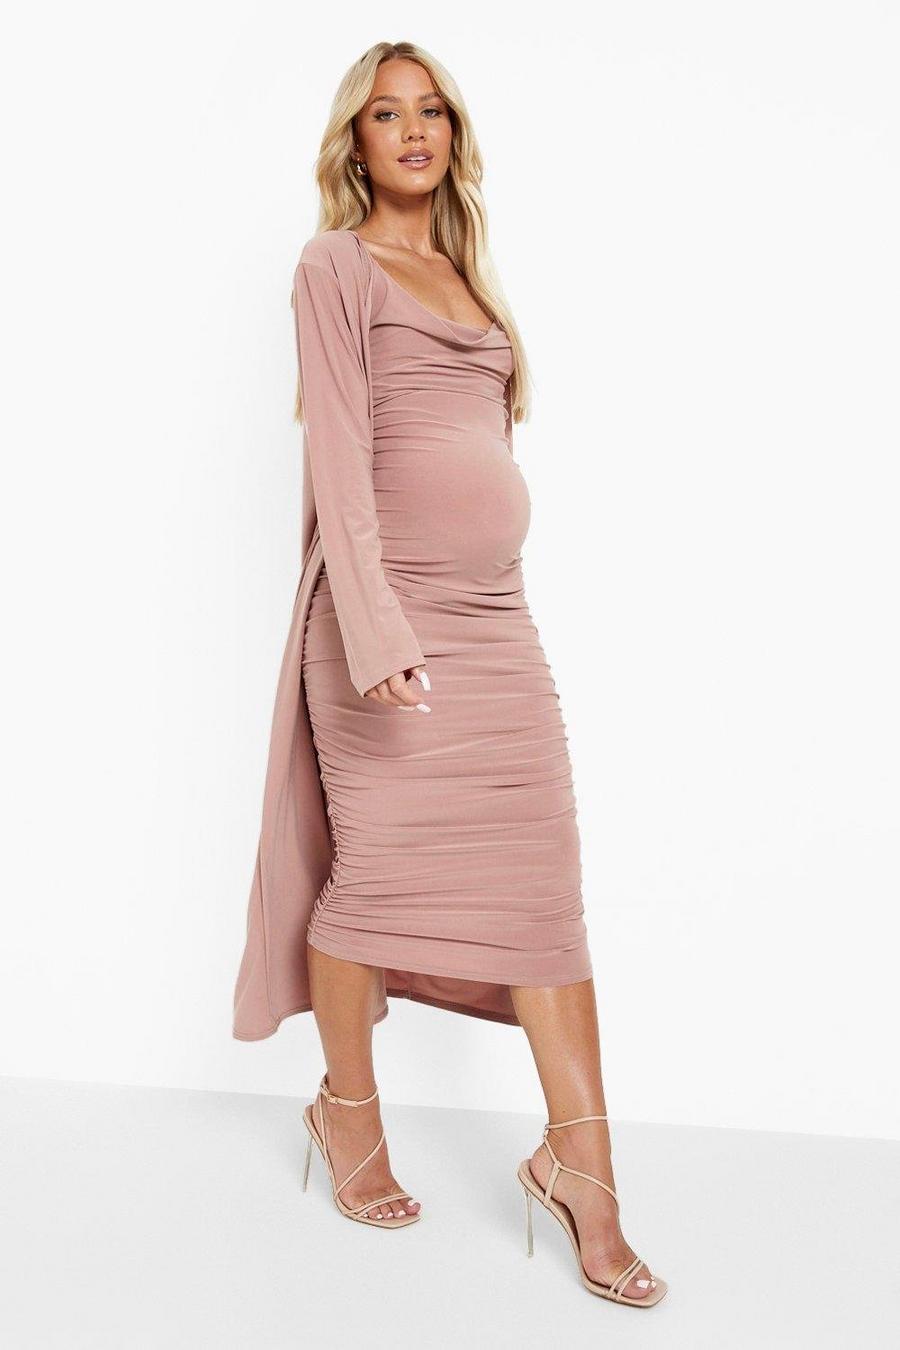 Rose rosa Maternity Strappy Cowl Neck Dress And Duster Coat